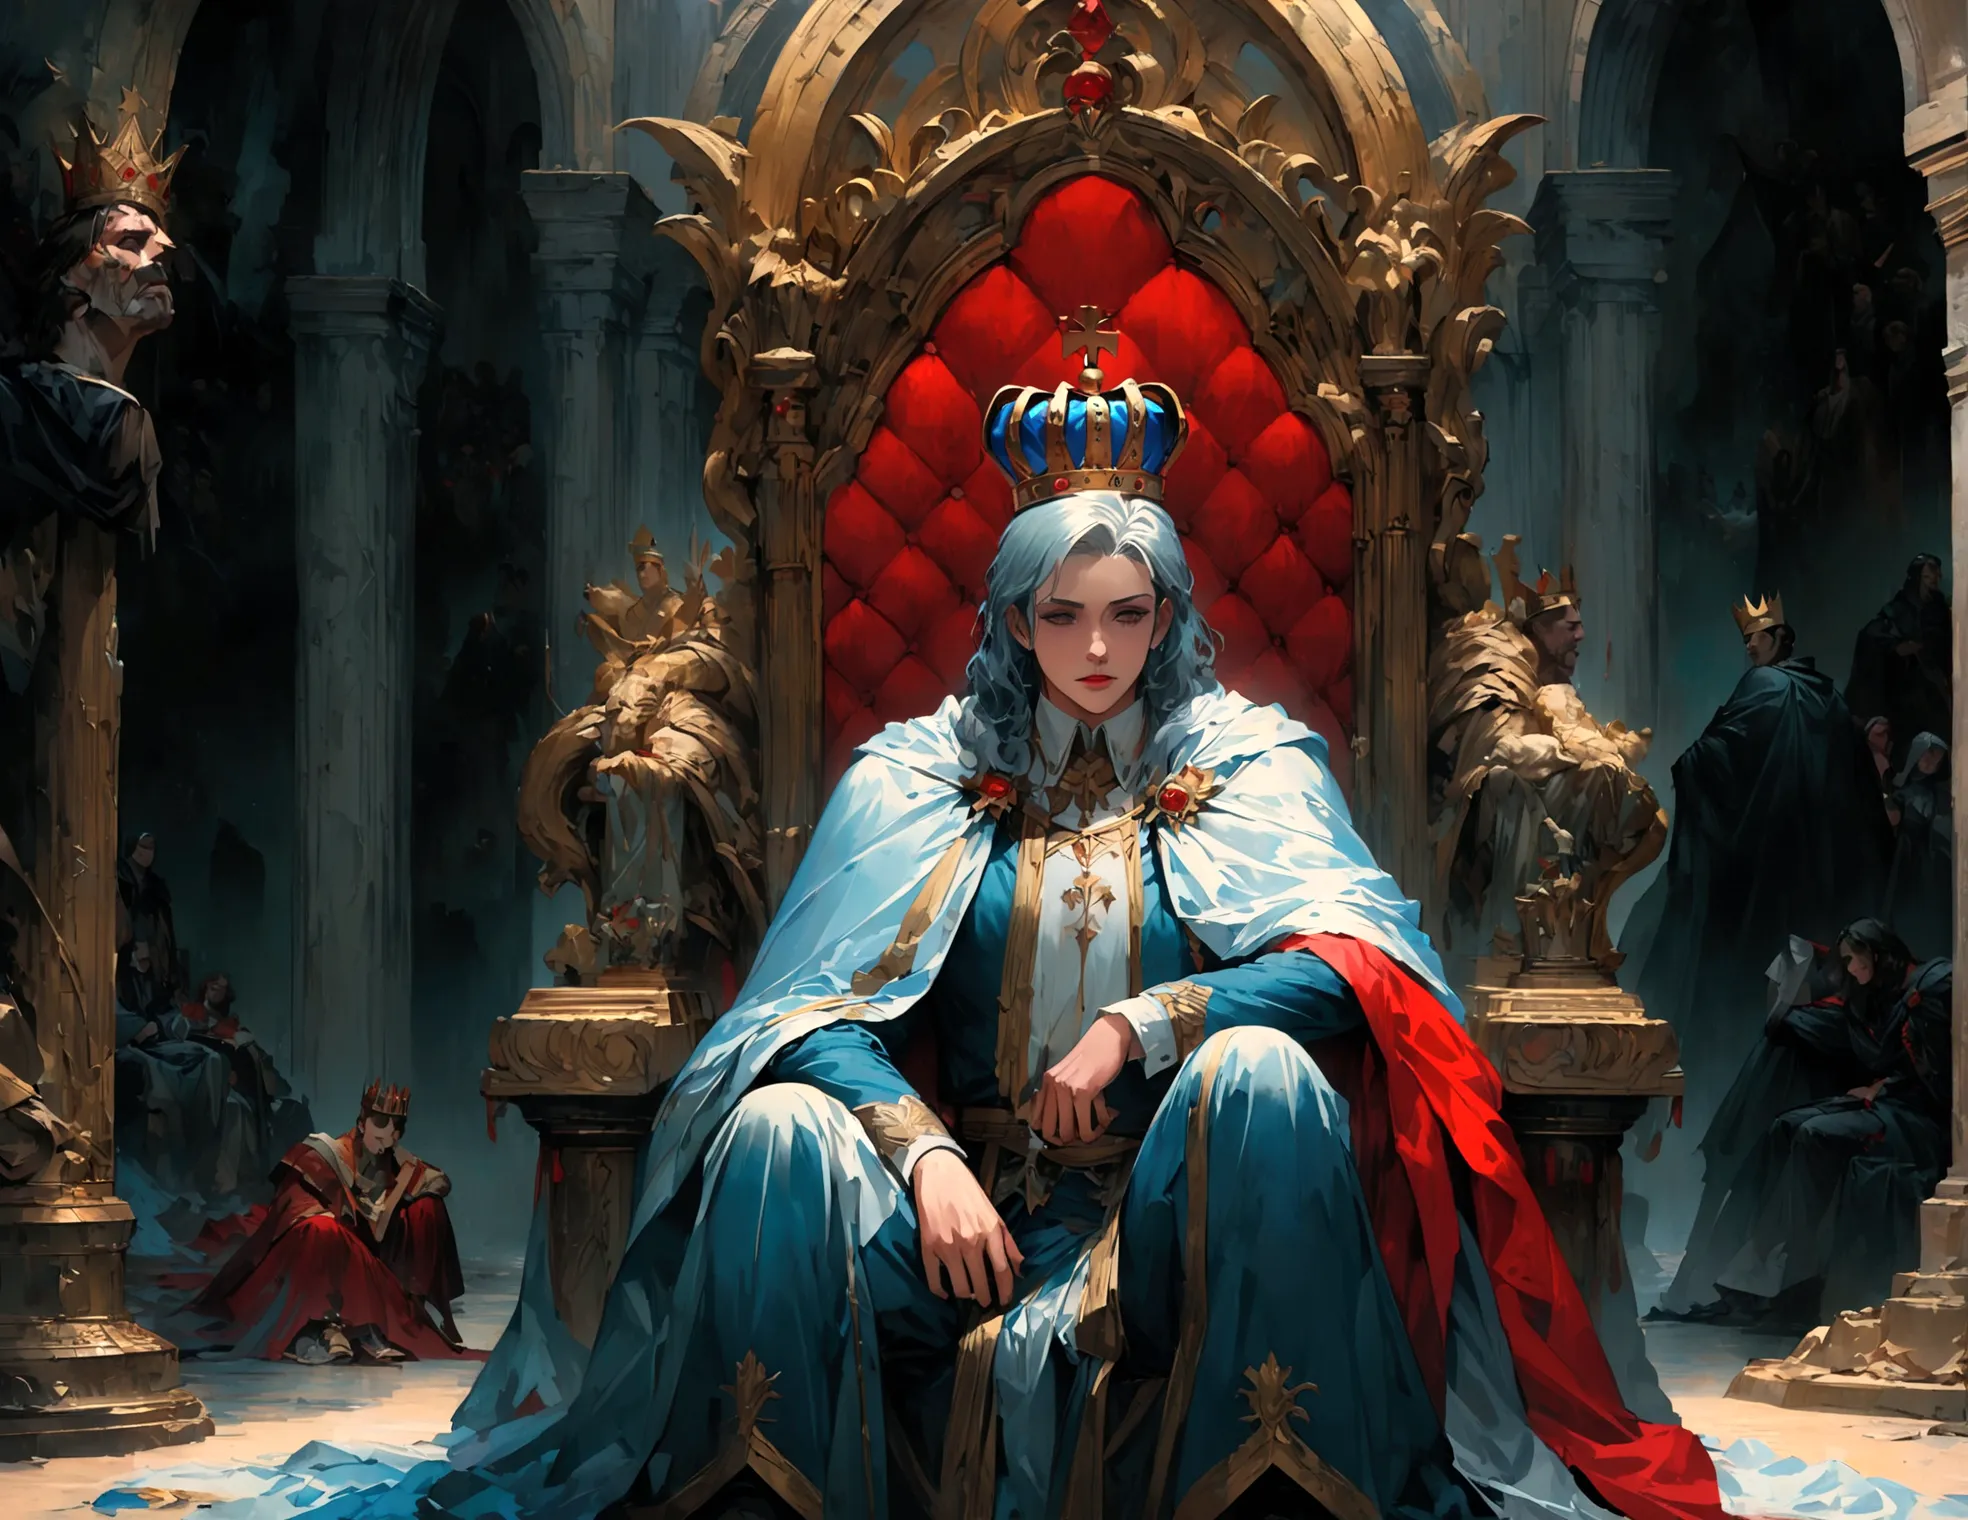 Throne room scenery,oil painting style,king sitting on the throne,Subjects prostrating,A king with absolute power who looks down...